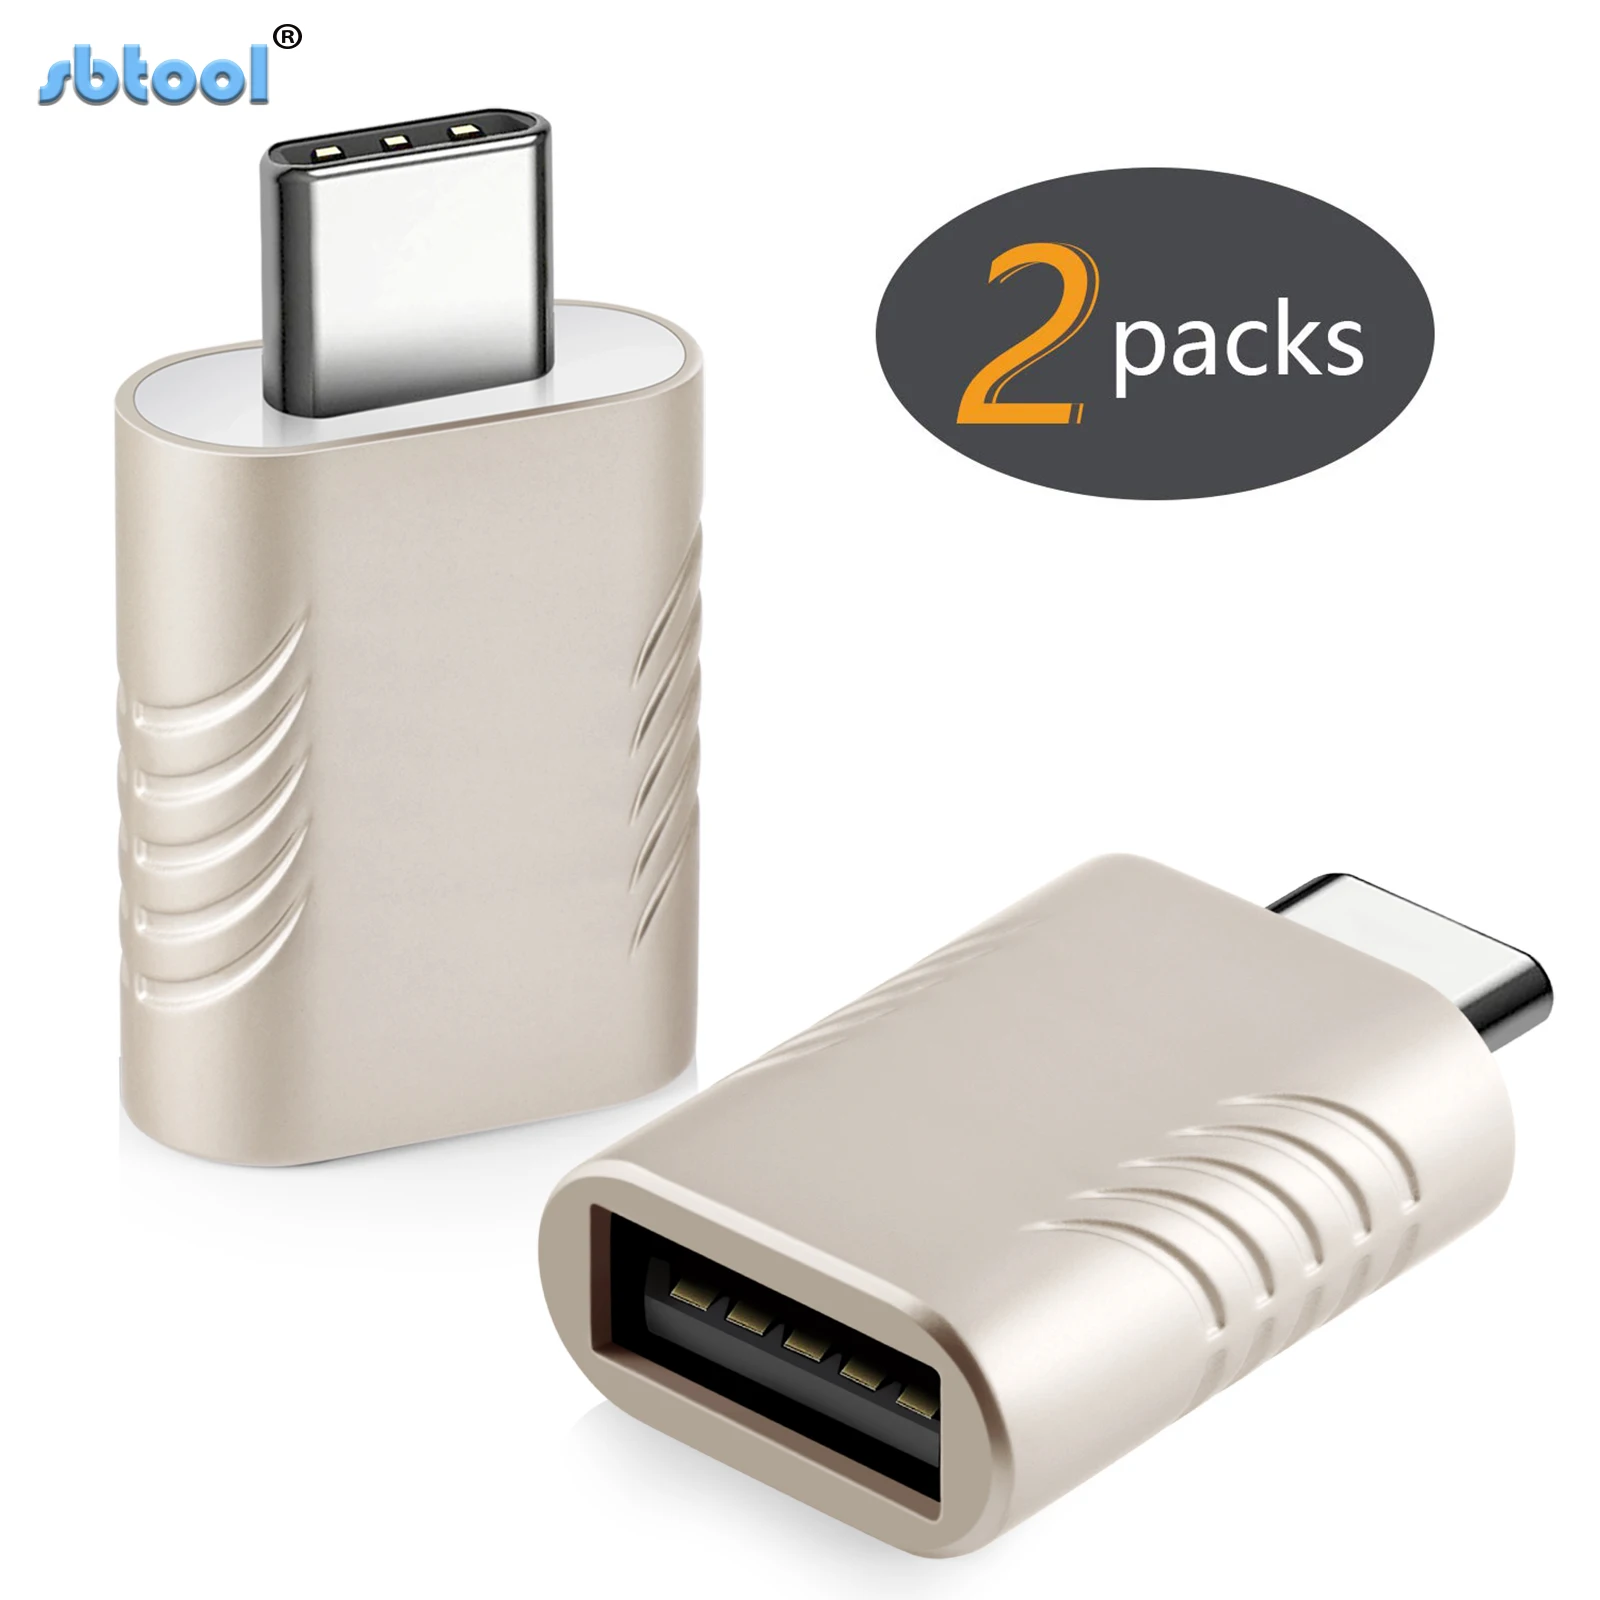 

Wholesale USB C 5Gbps Sbtool USB3.0 A Male to USB Type C Female Adapter Converter, Gold